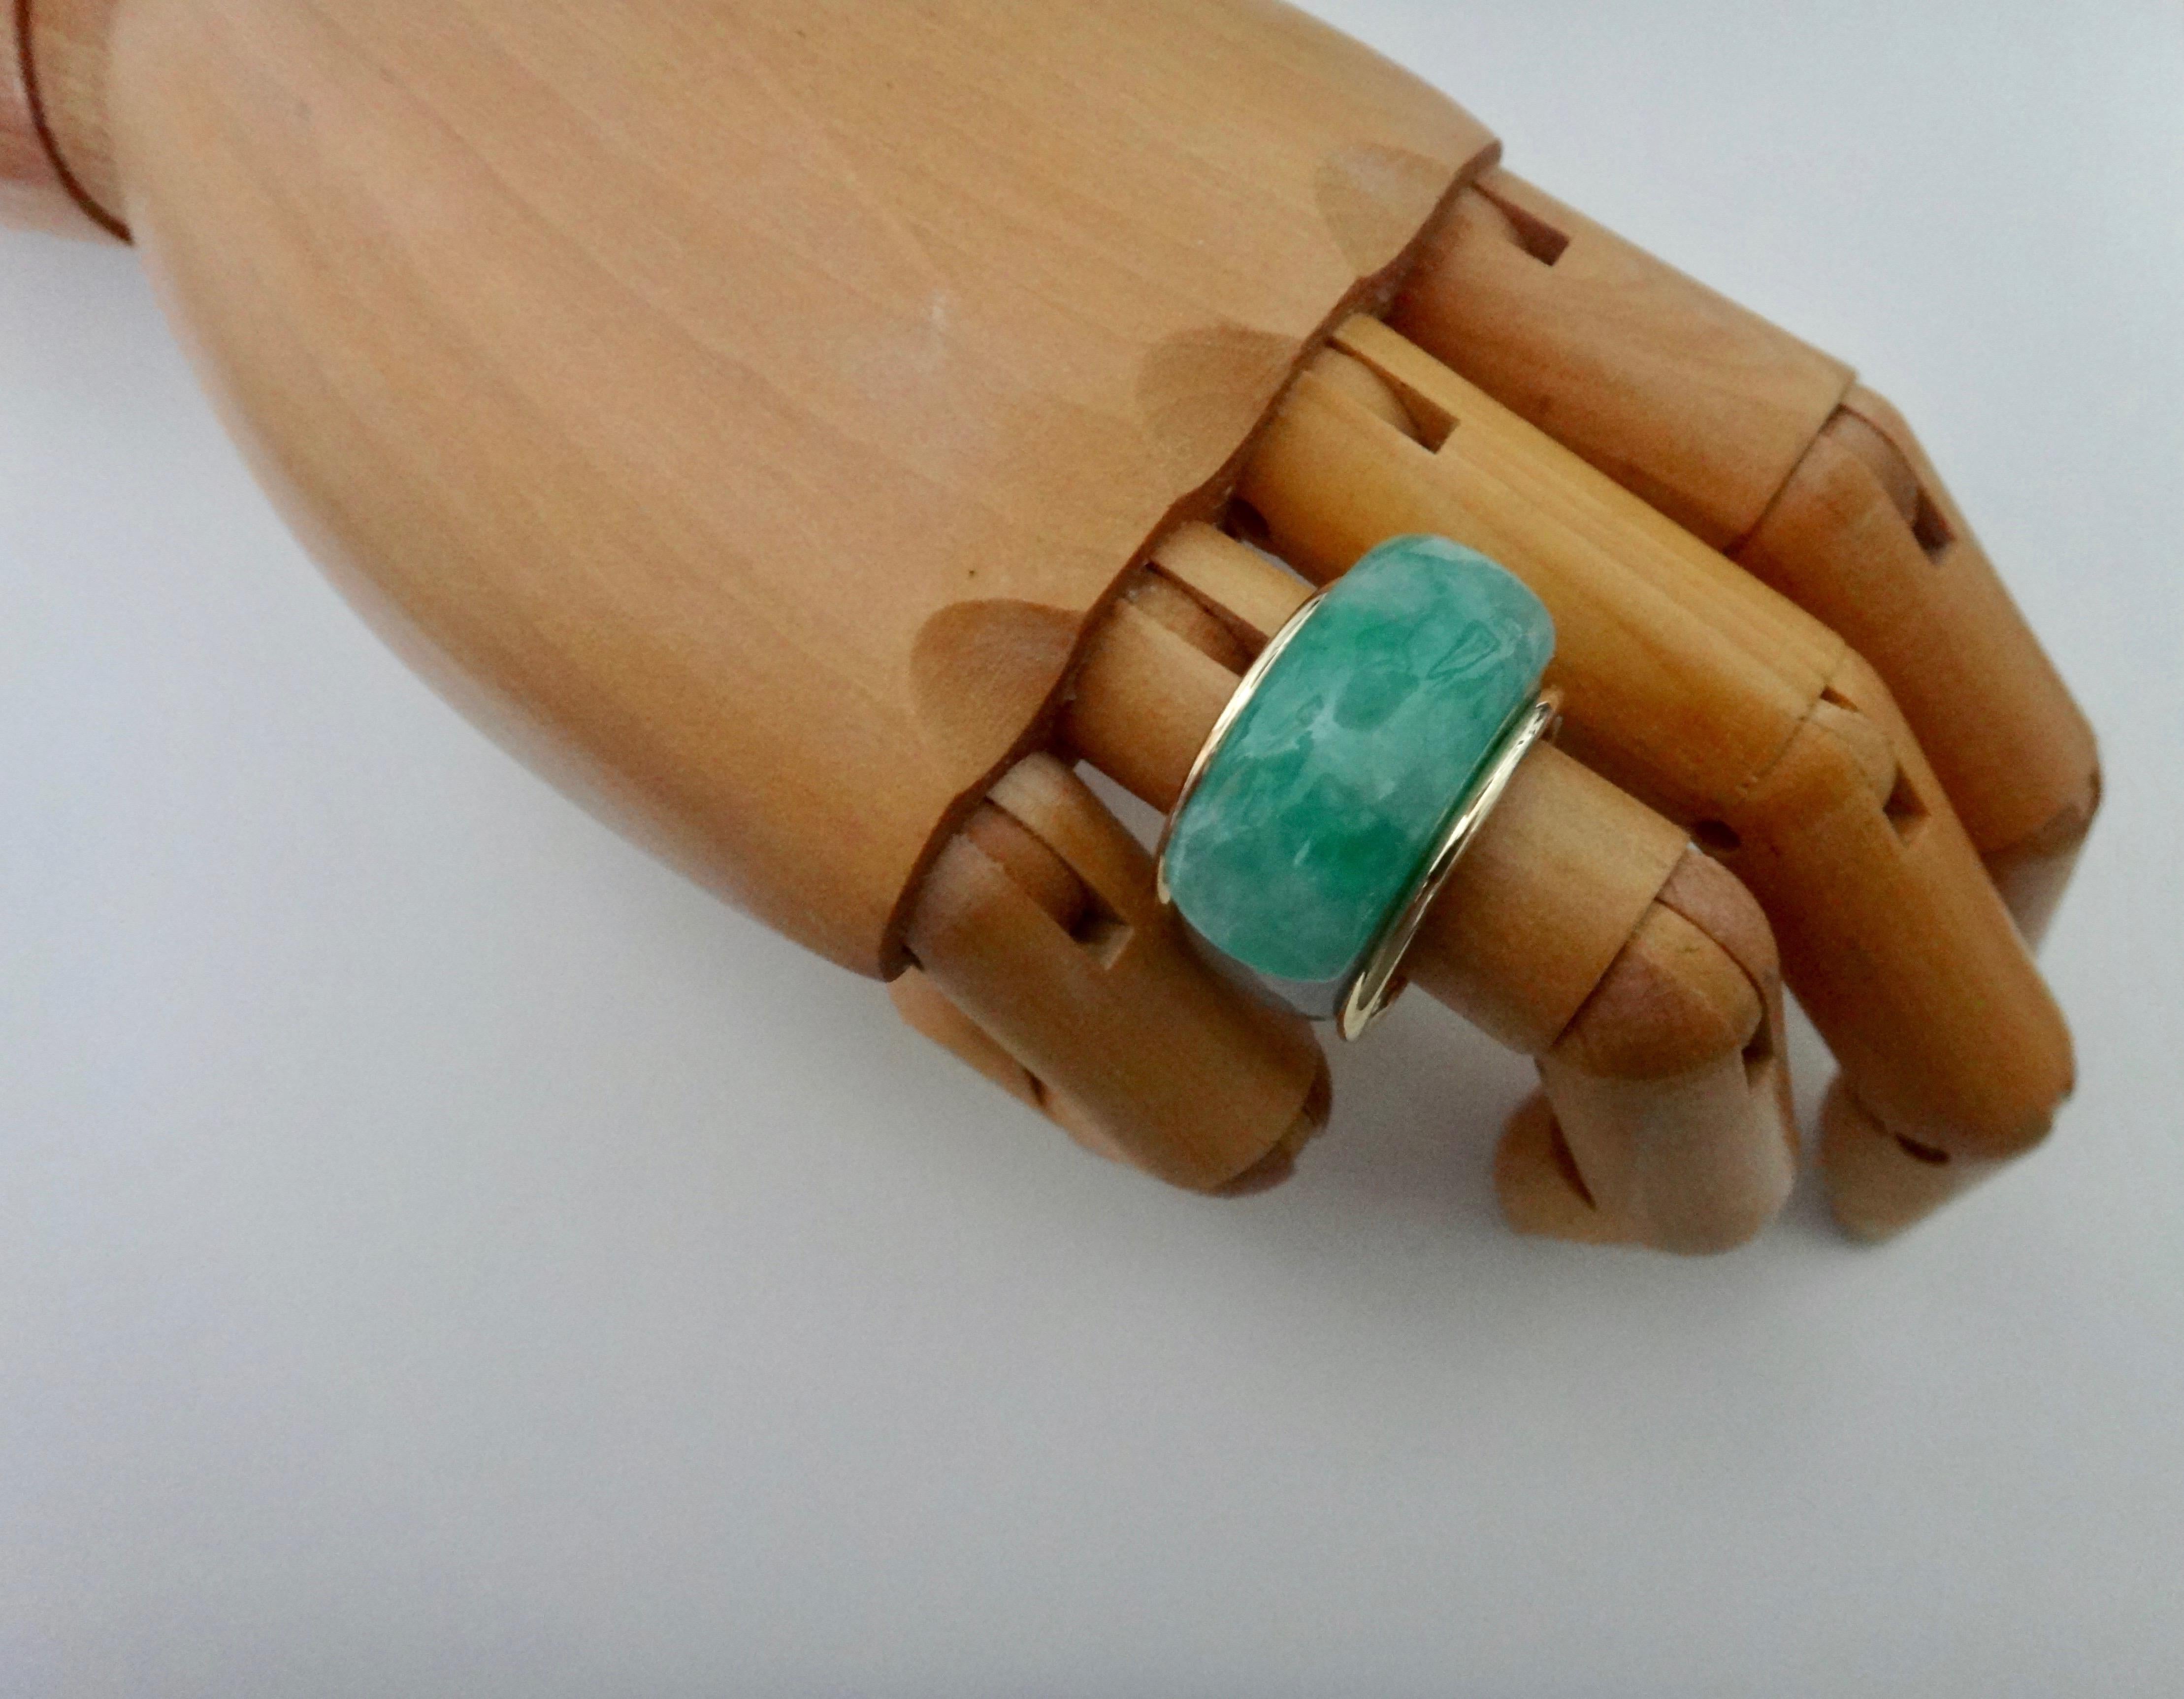 Jadeite (origin: Myanmar) has been carved into a classic saddle ring.  The Asian saddle ring is a style hundreds of years old.  The carver oriented the rough in such a way so that the 